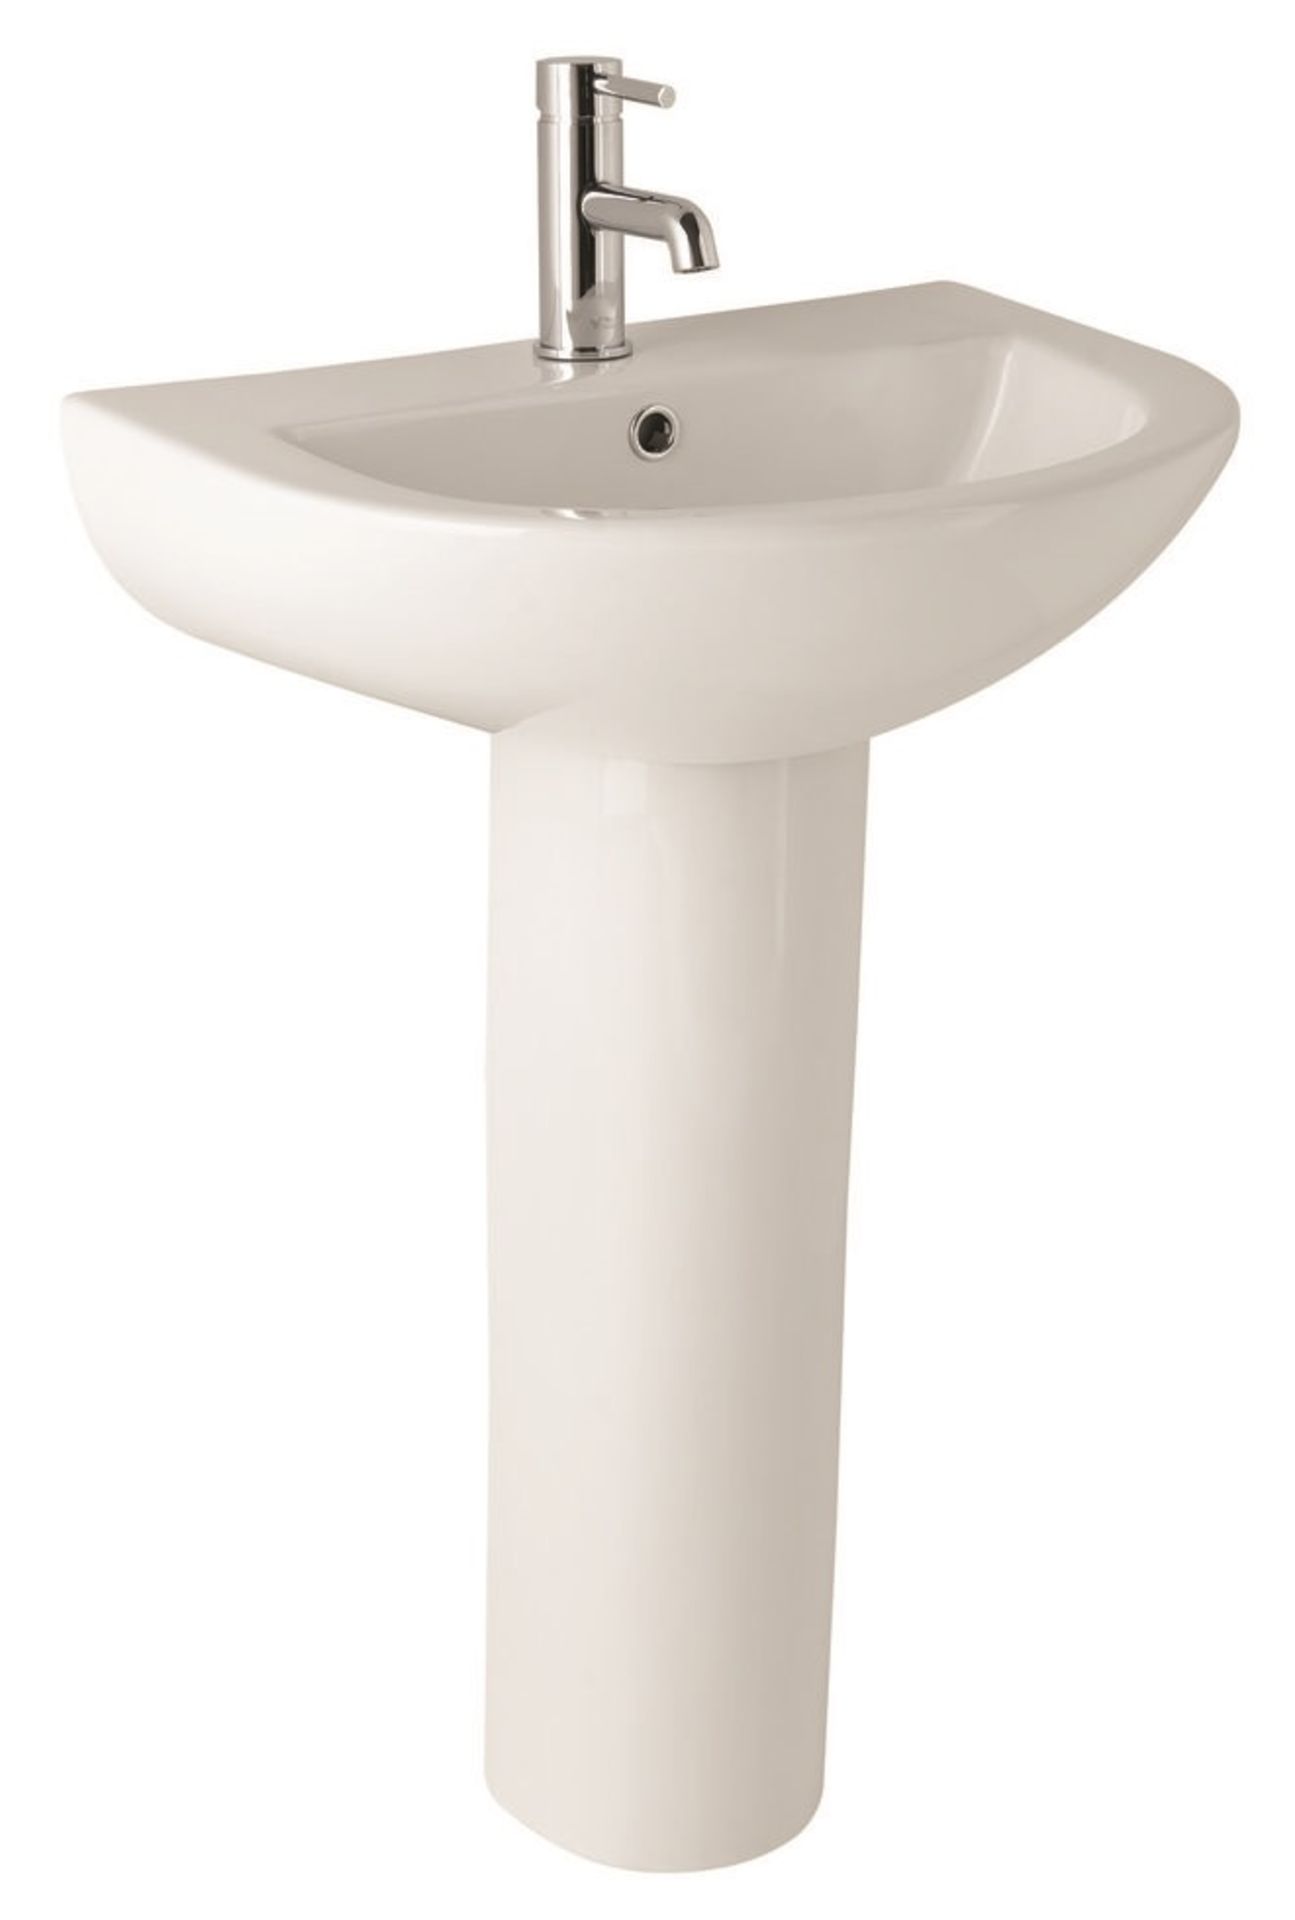 Pallet Lot of 29 x Vogue Bathrooms COMFORT Single Tap Hole SINK BASINS With Pedestals - 600mm Widith - Image 2 of 2